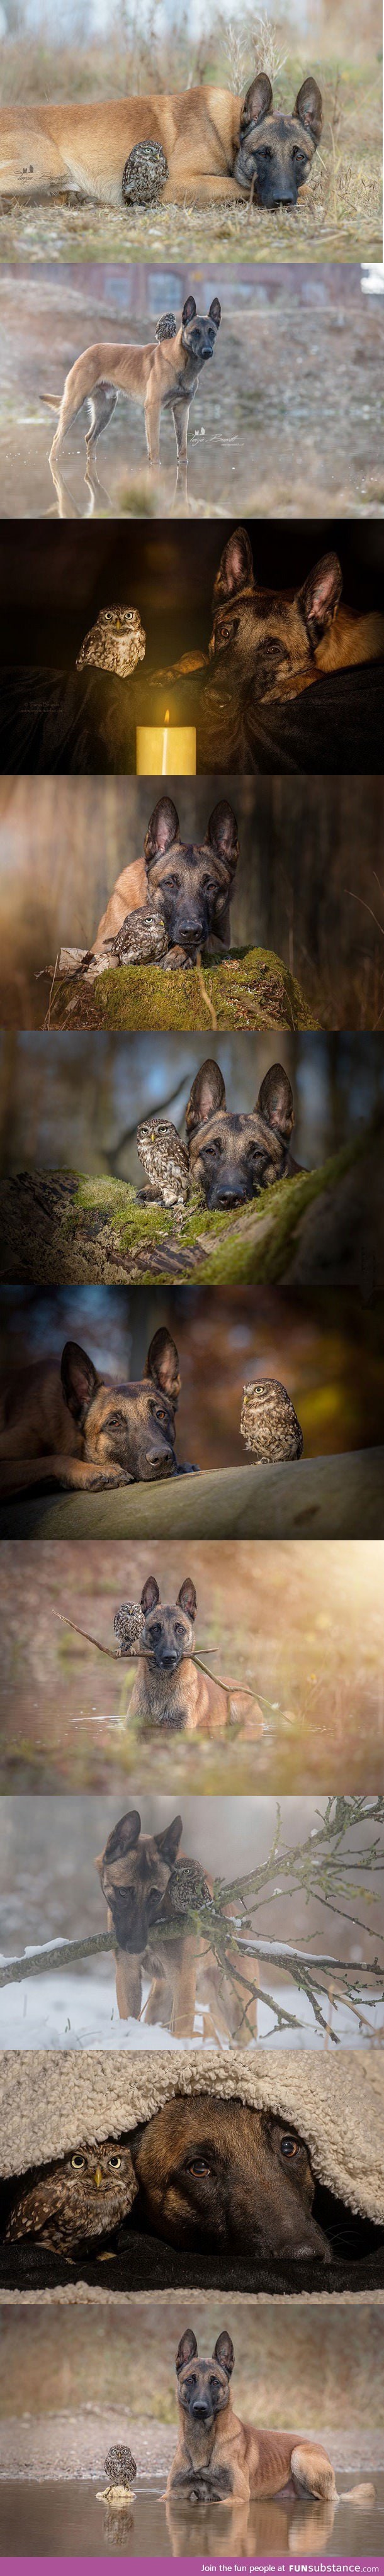 Best friends owl and dog